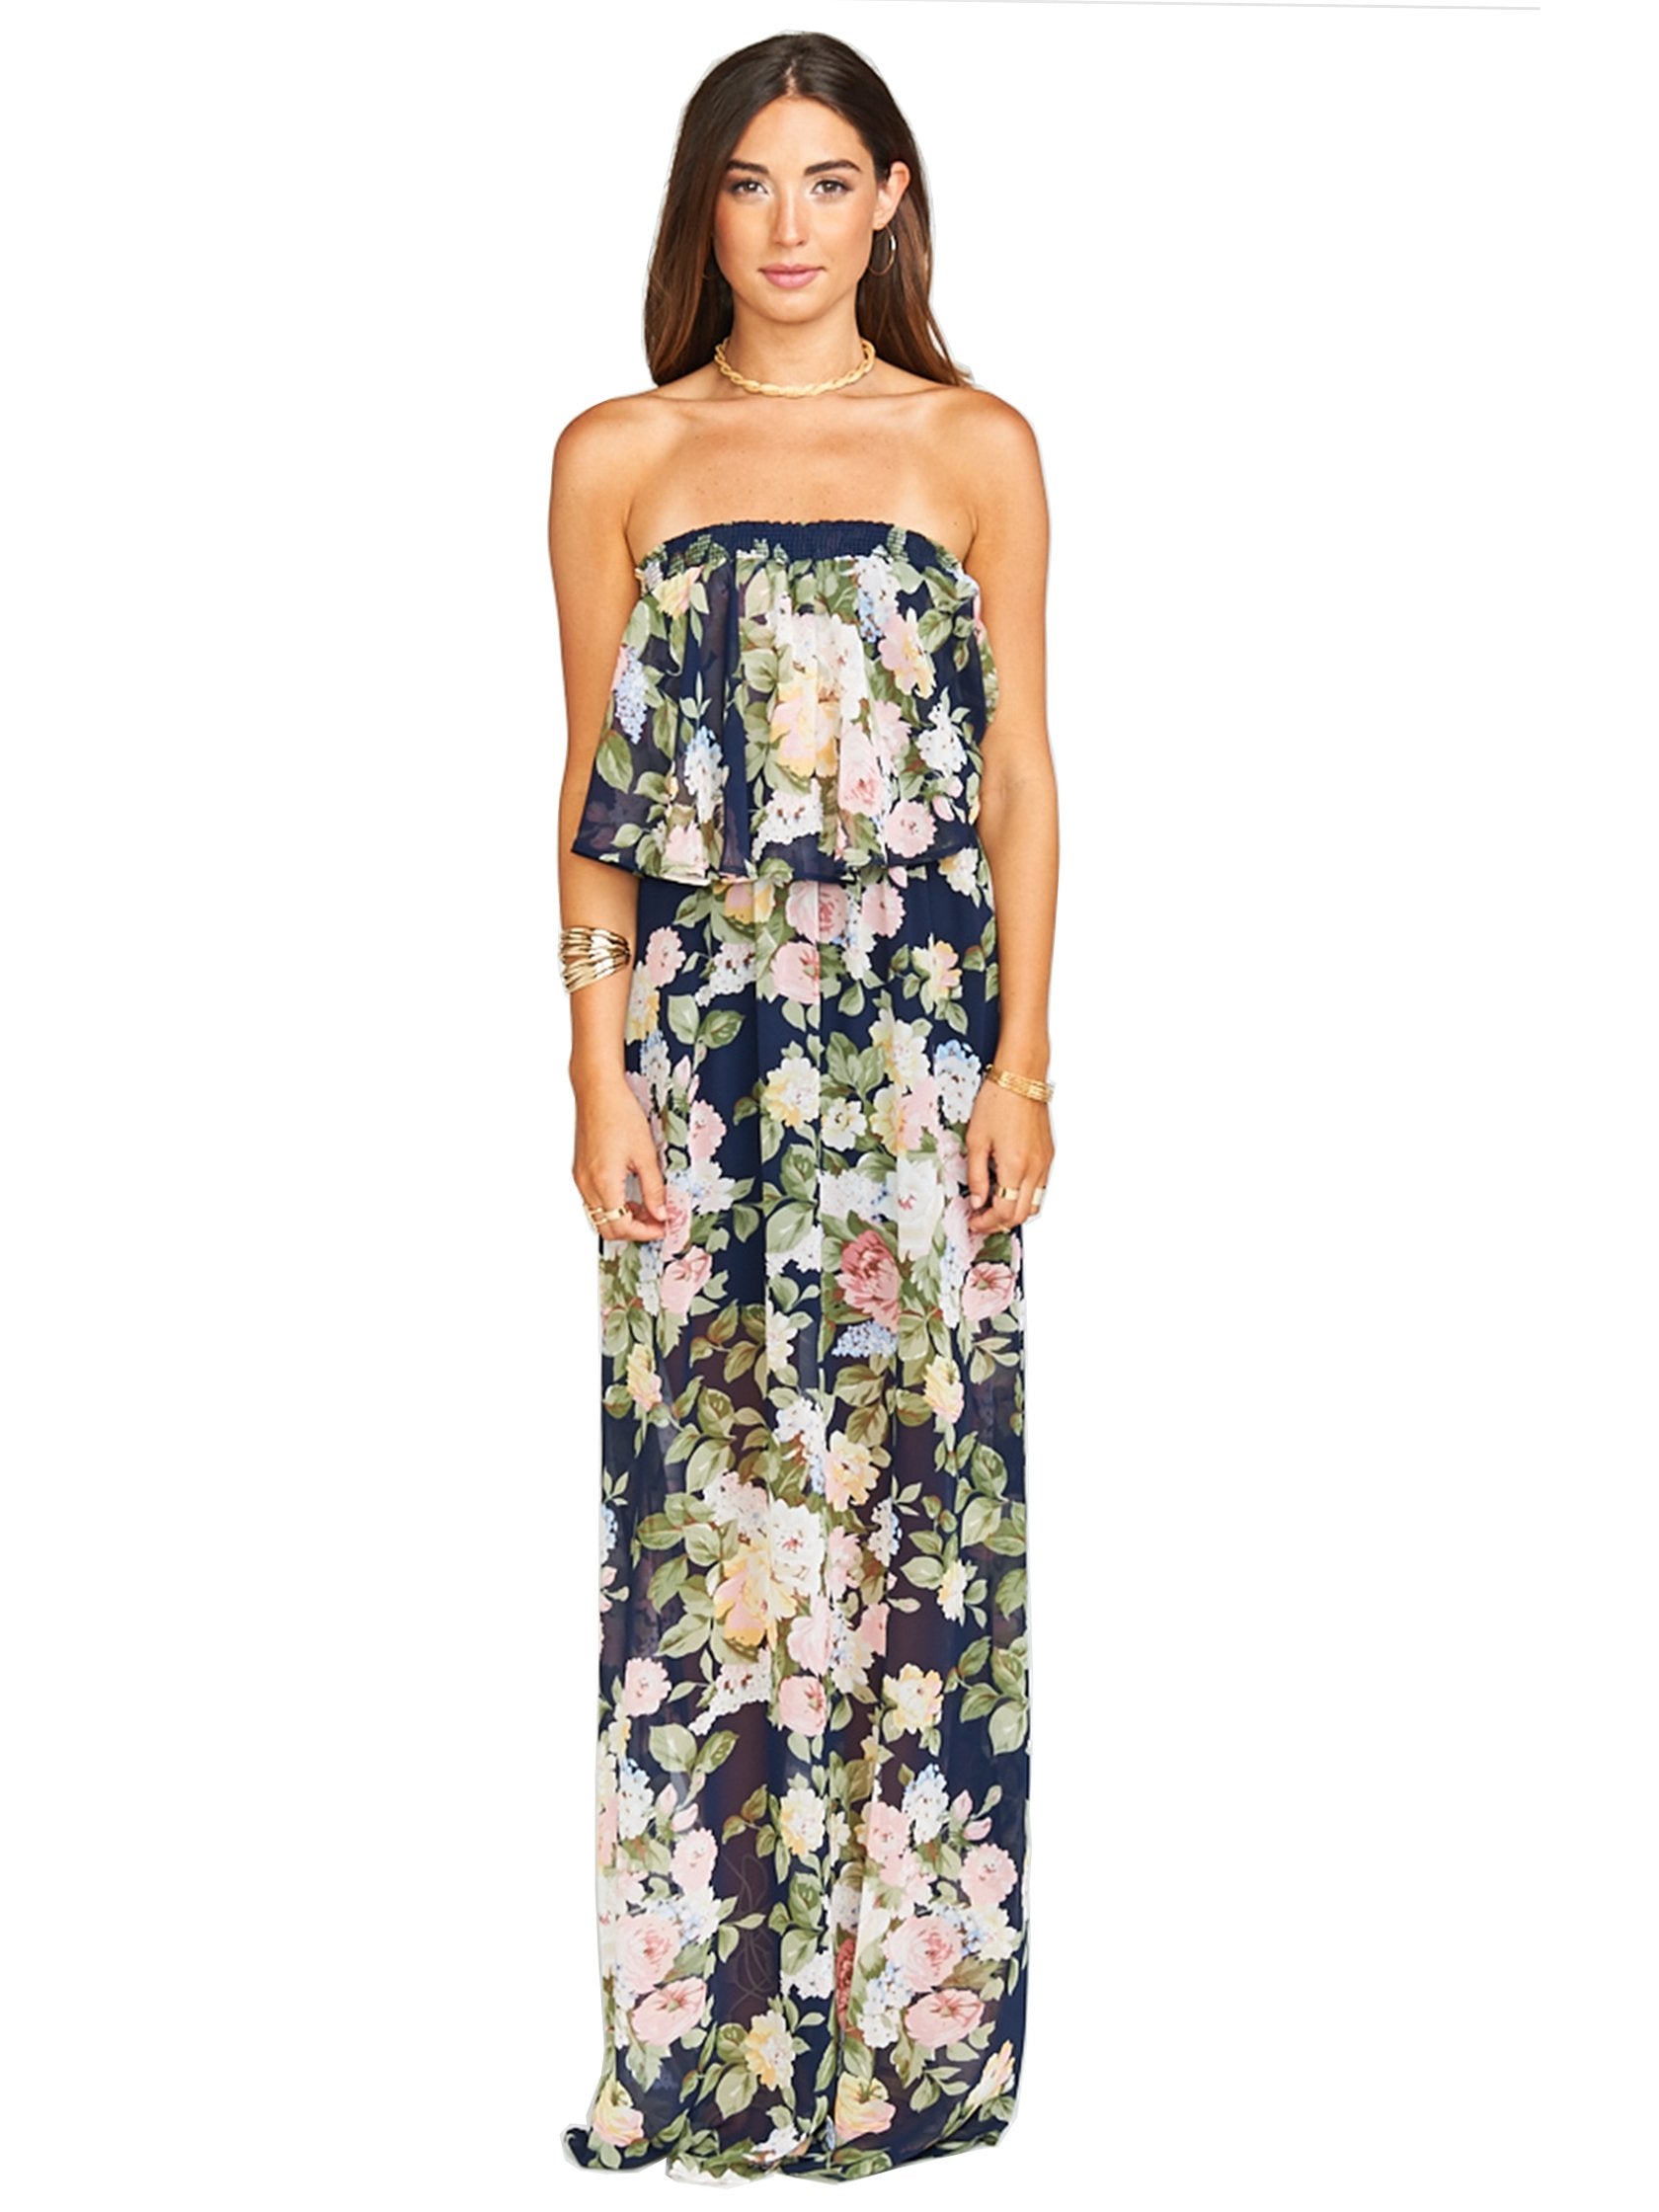 Girl outfit in a dress rental from Show Me Your Mumu called Hacienda Maxi Dress